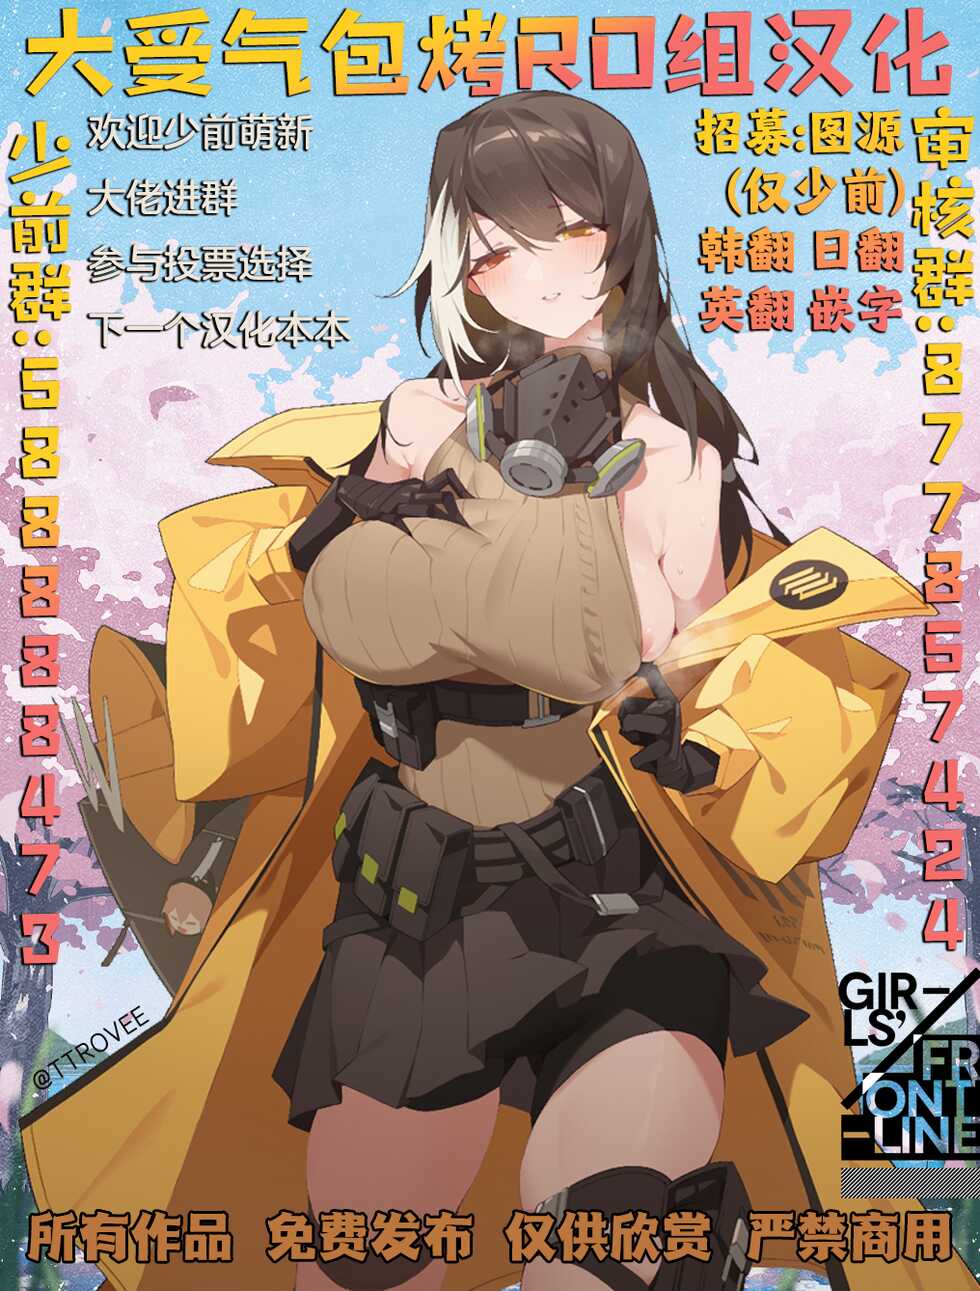 [KRS] Deceived as maintenance, Carcano's sister is raped. (Girls' Frontline) [Chinese] [大受气包烤RO组汉化] - Page 19